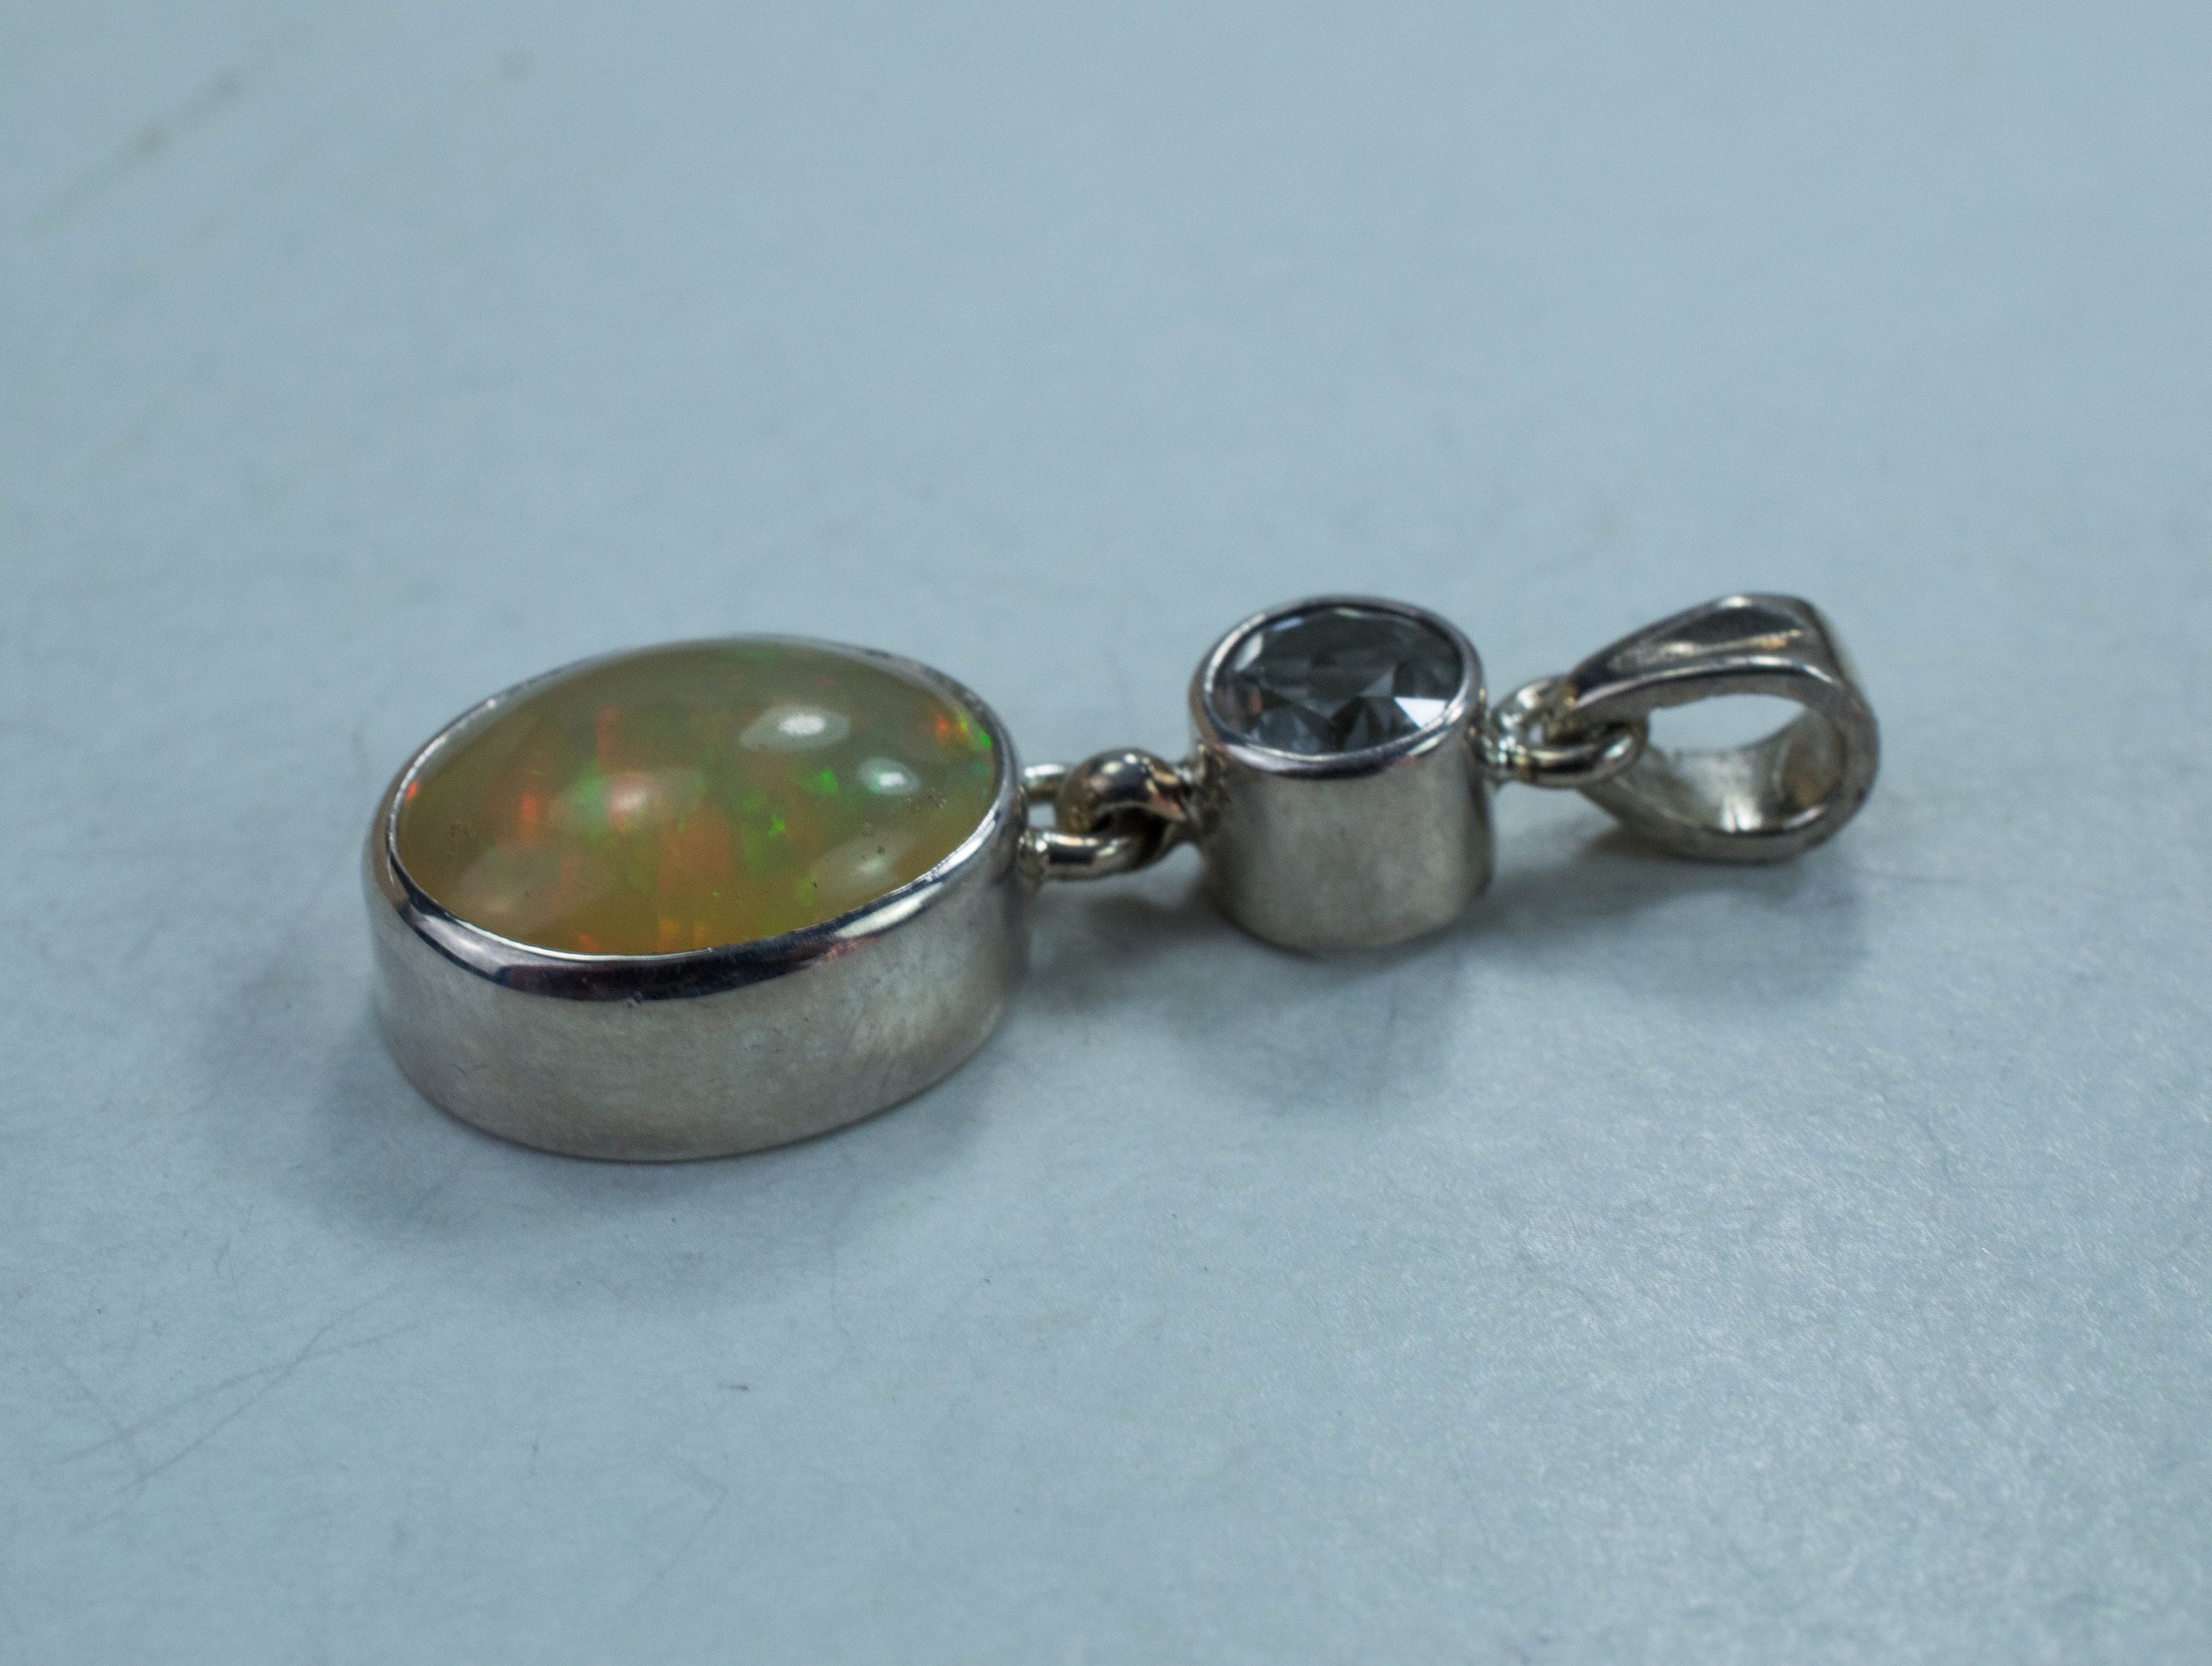 Ethiopian Opal and Topaz Pendant, Natural Untreated Welo Opal and Brazil Topaz - Mark Oliver Gems